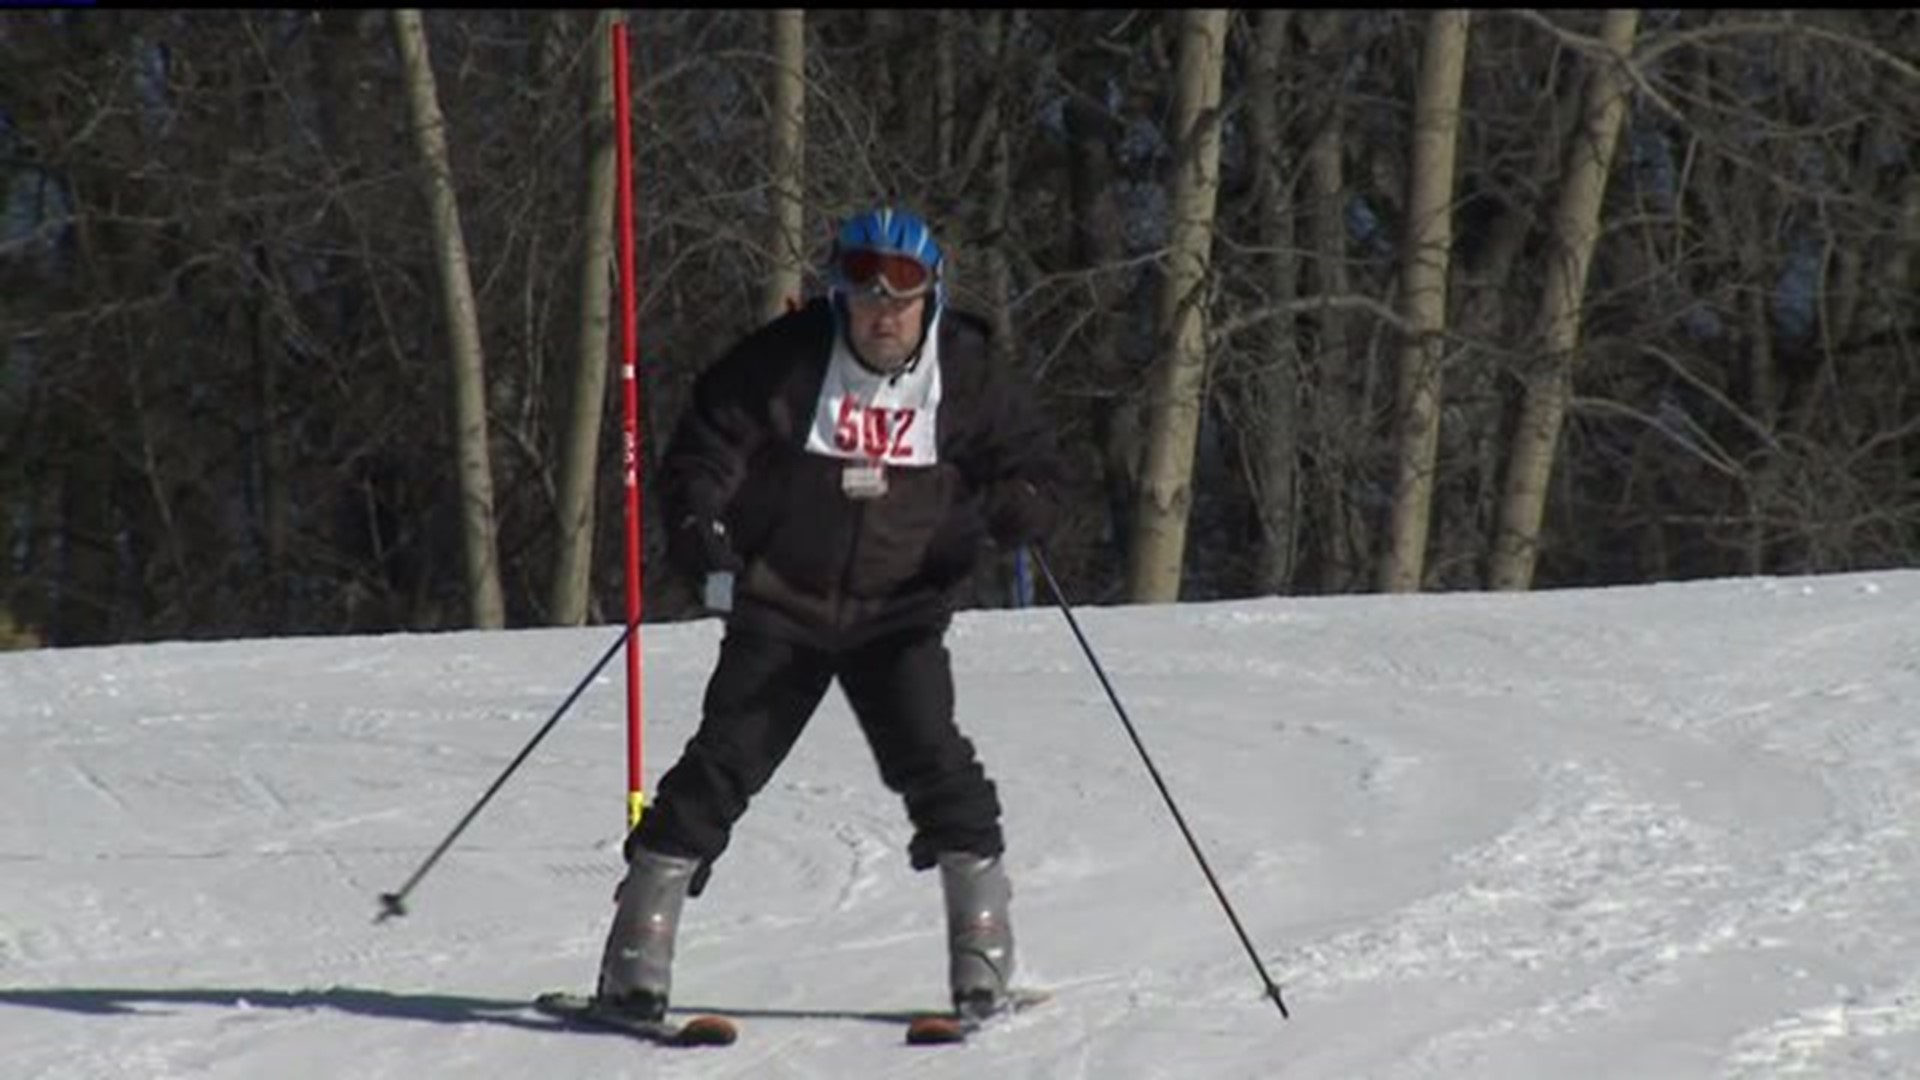 Special Olympics Skiers hit the slopes at Ski Snowstar